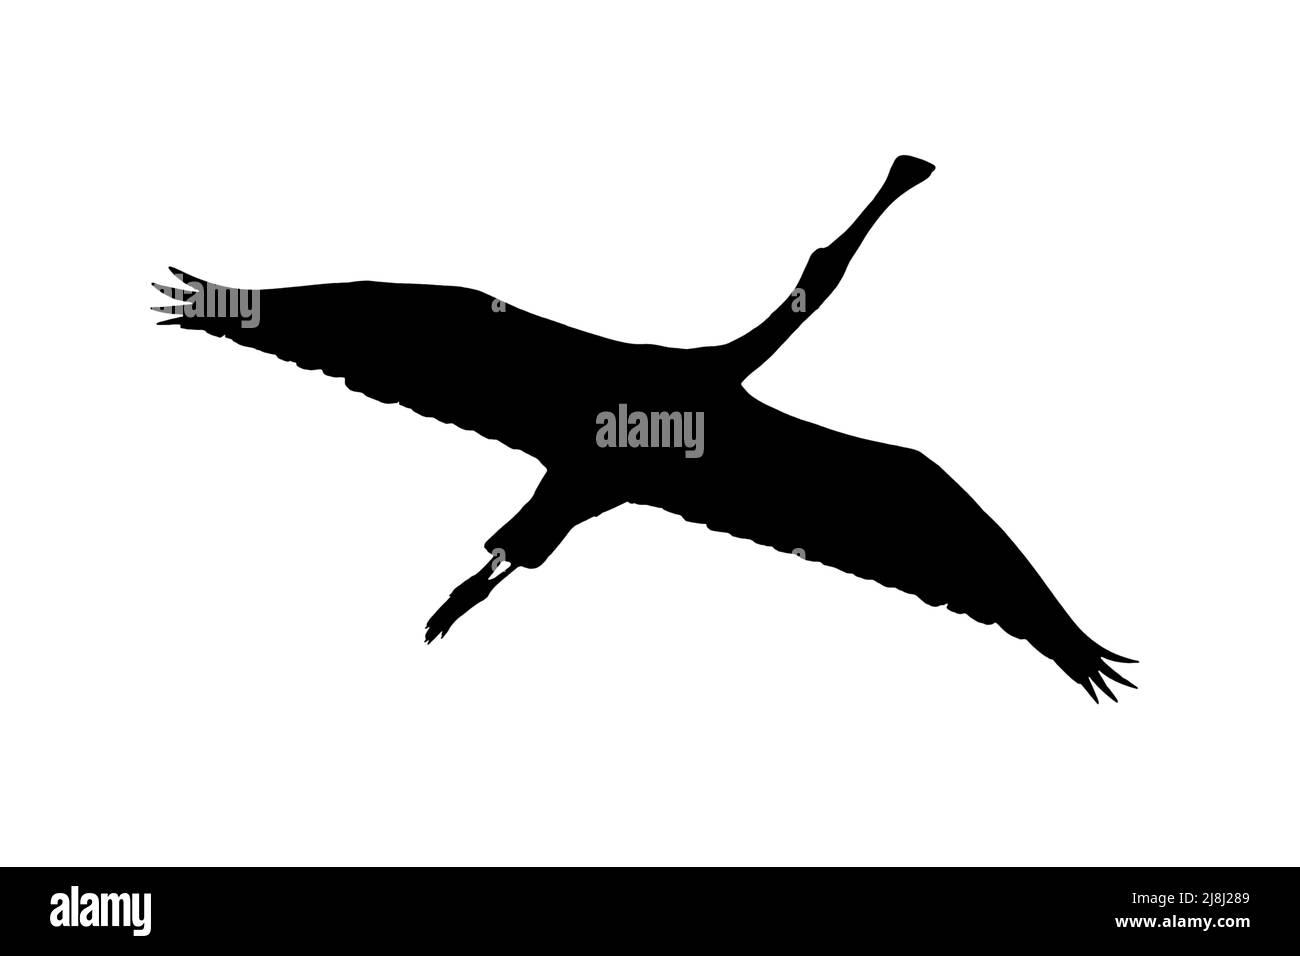 Silhouette of Eurasian spoonbill (Platalea leucorodia) in flight outlined against white background to show wings, head and tail shapes Stock Photo